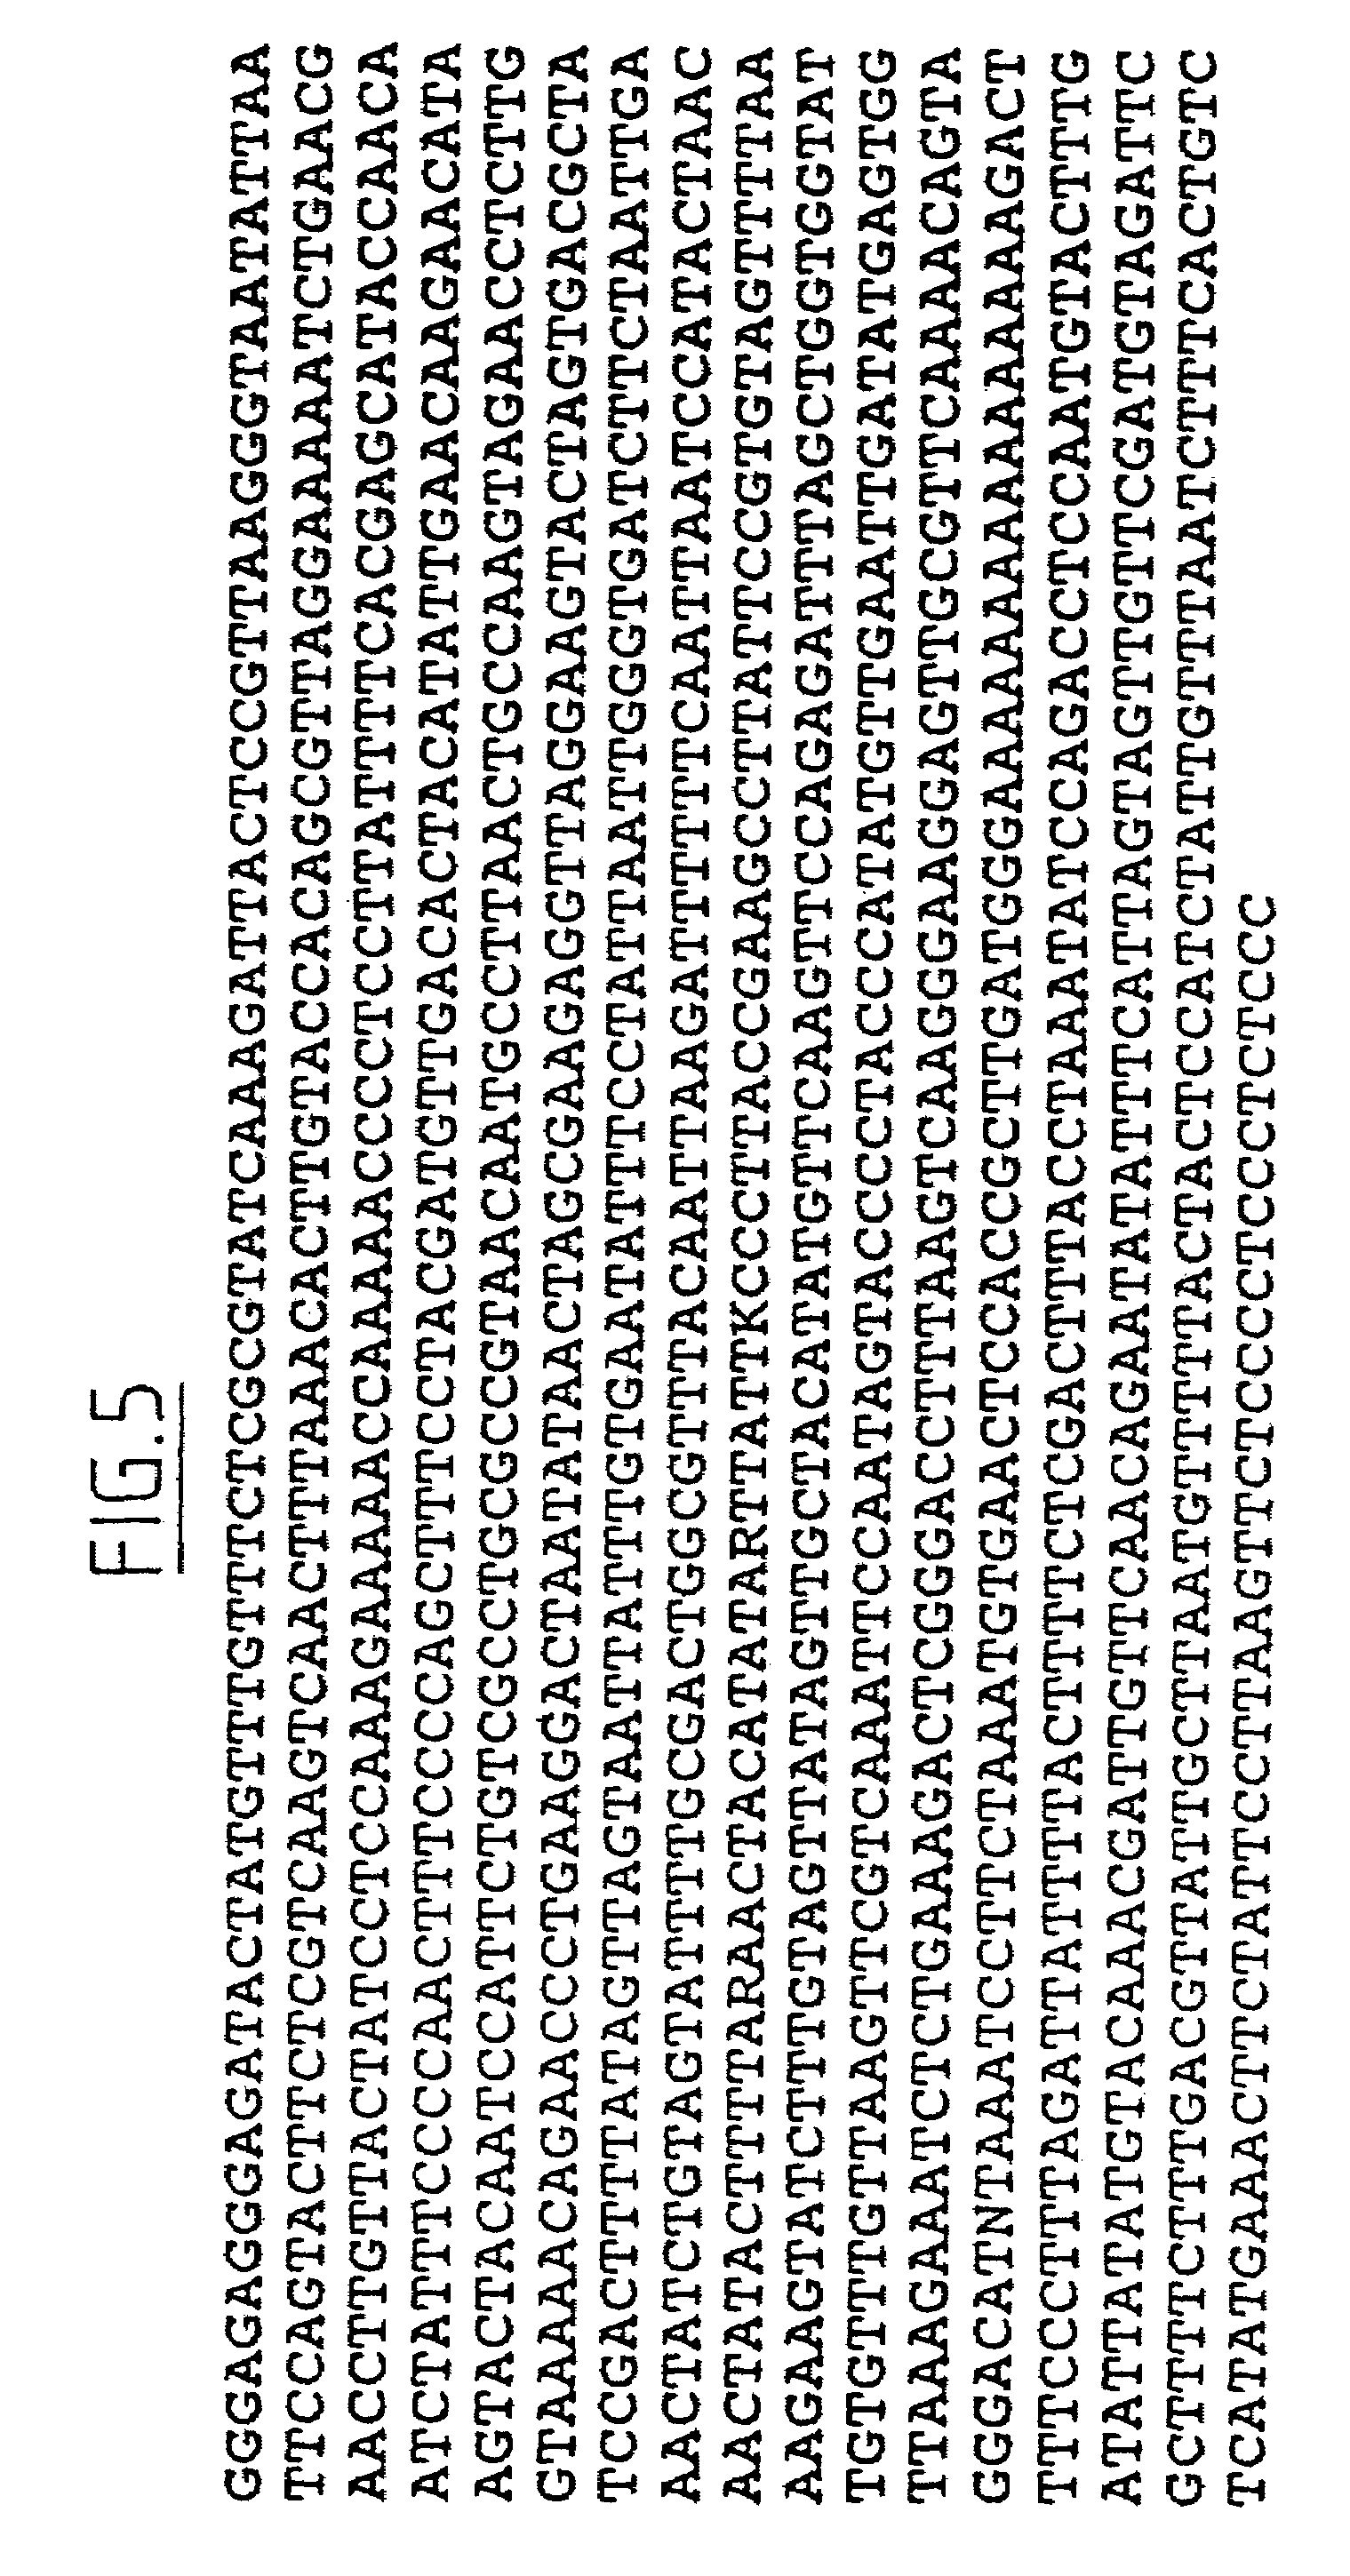 Method for obtaining a plant with a lasting resistance to a pathogen